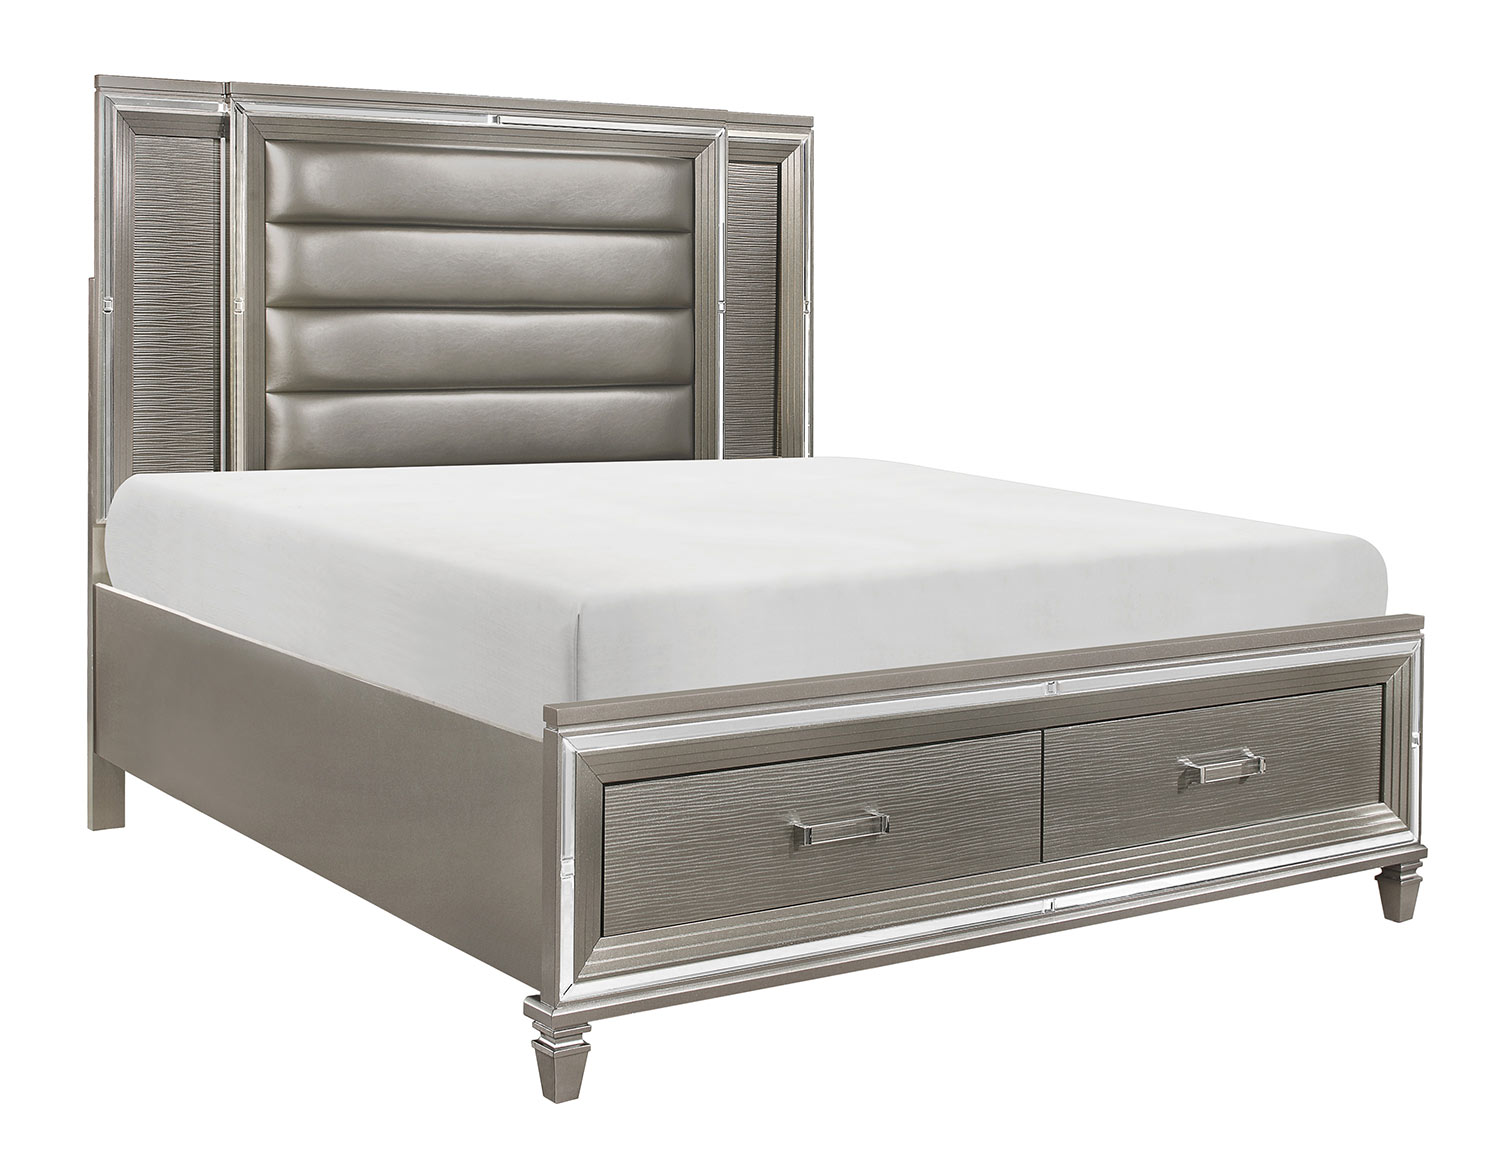 Homelegance Tamsin Platform Bed with Footboard Storage and LED Lighting - Silver-Gray Metallic